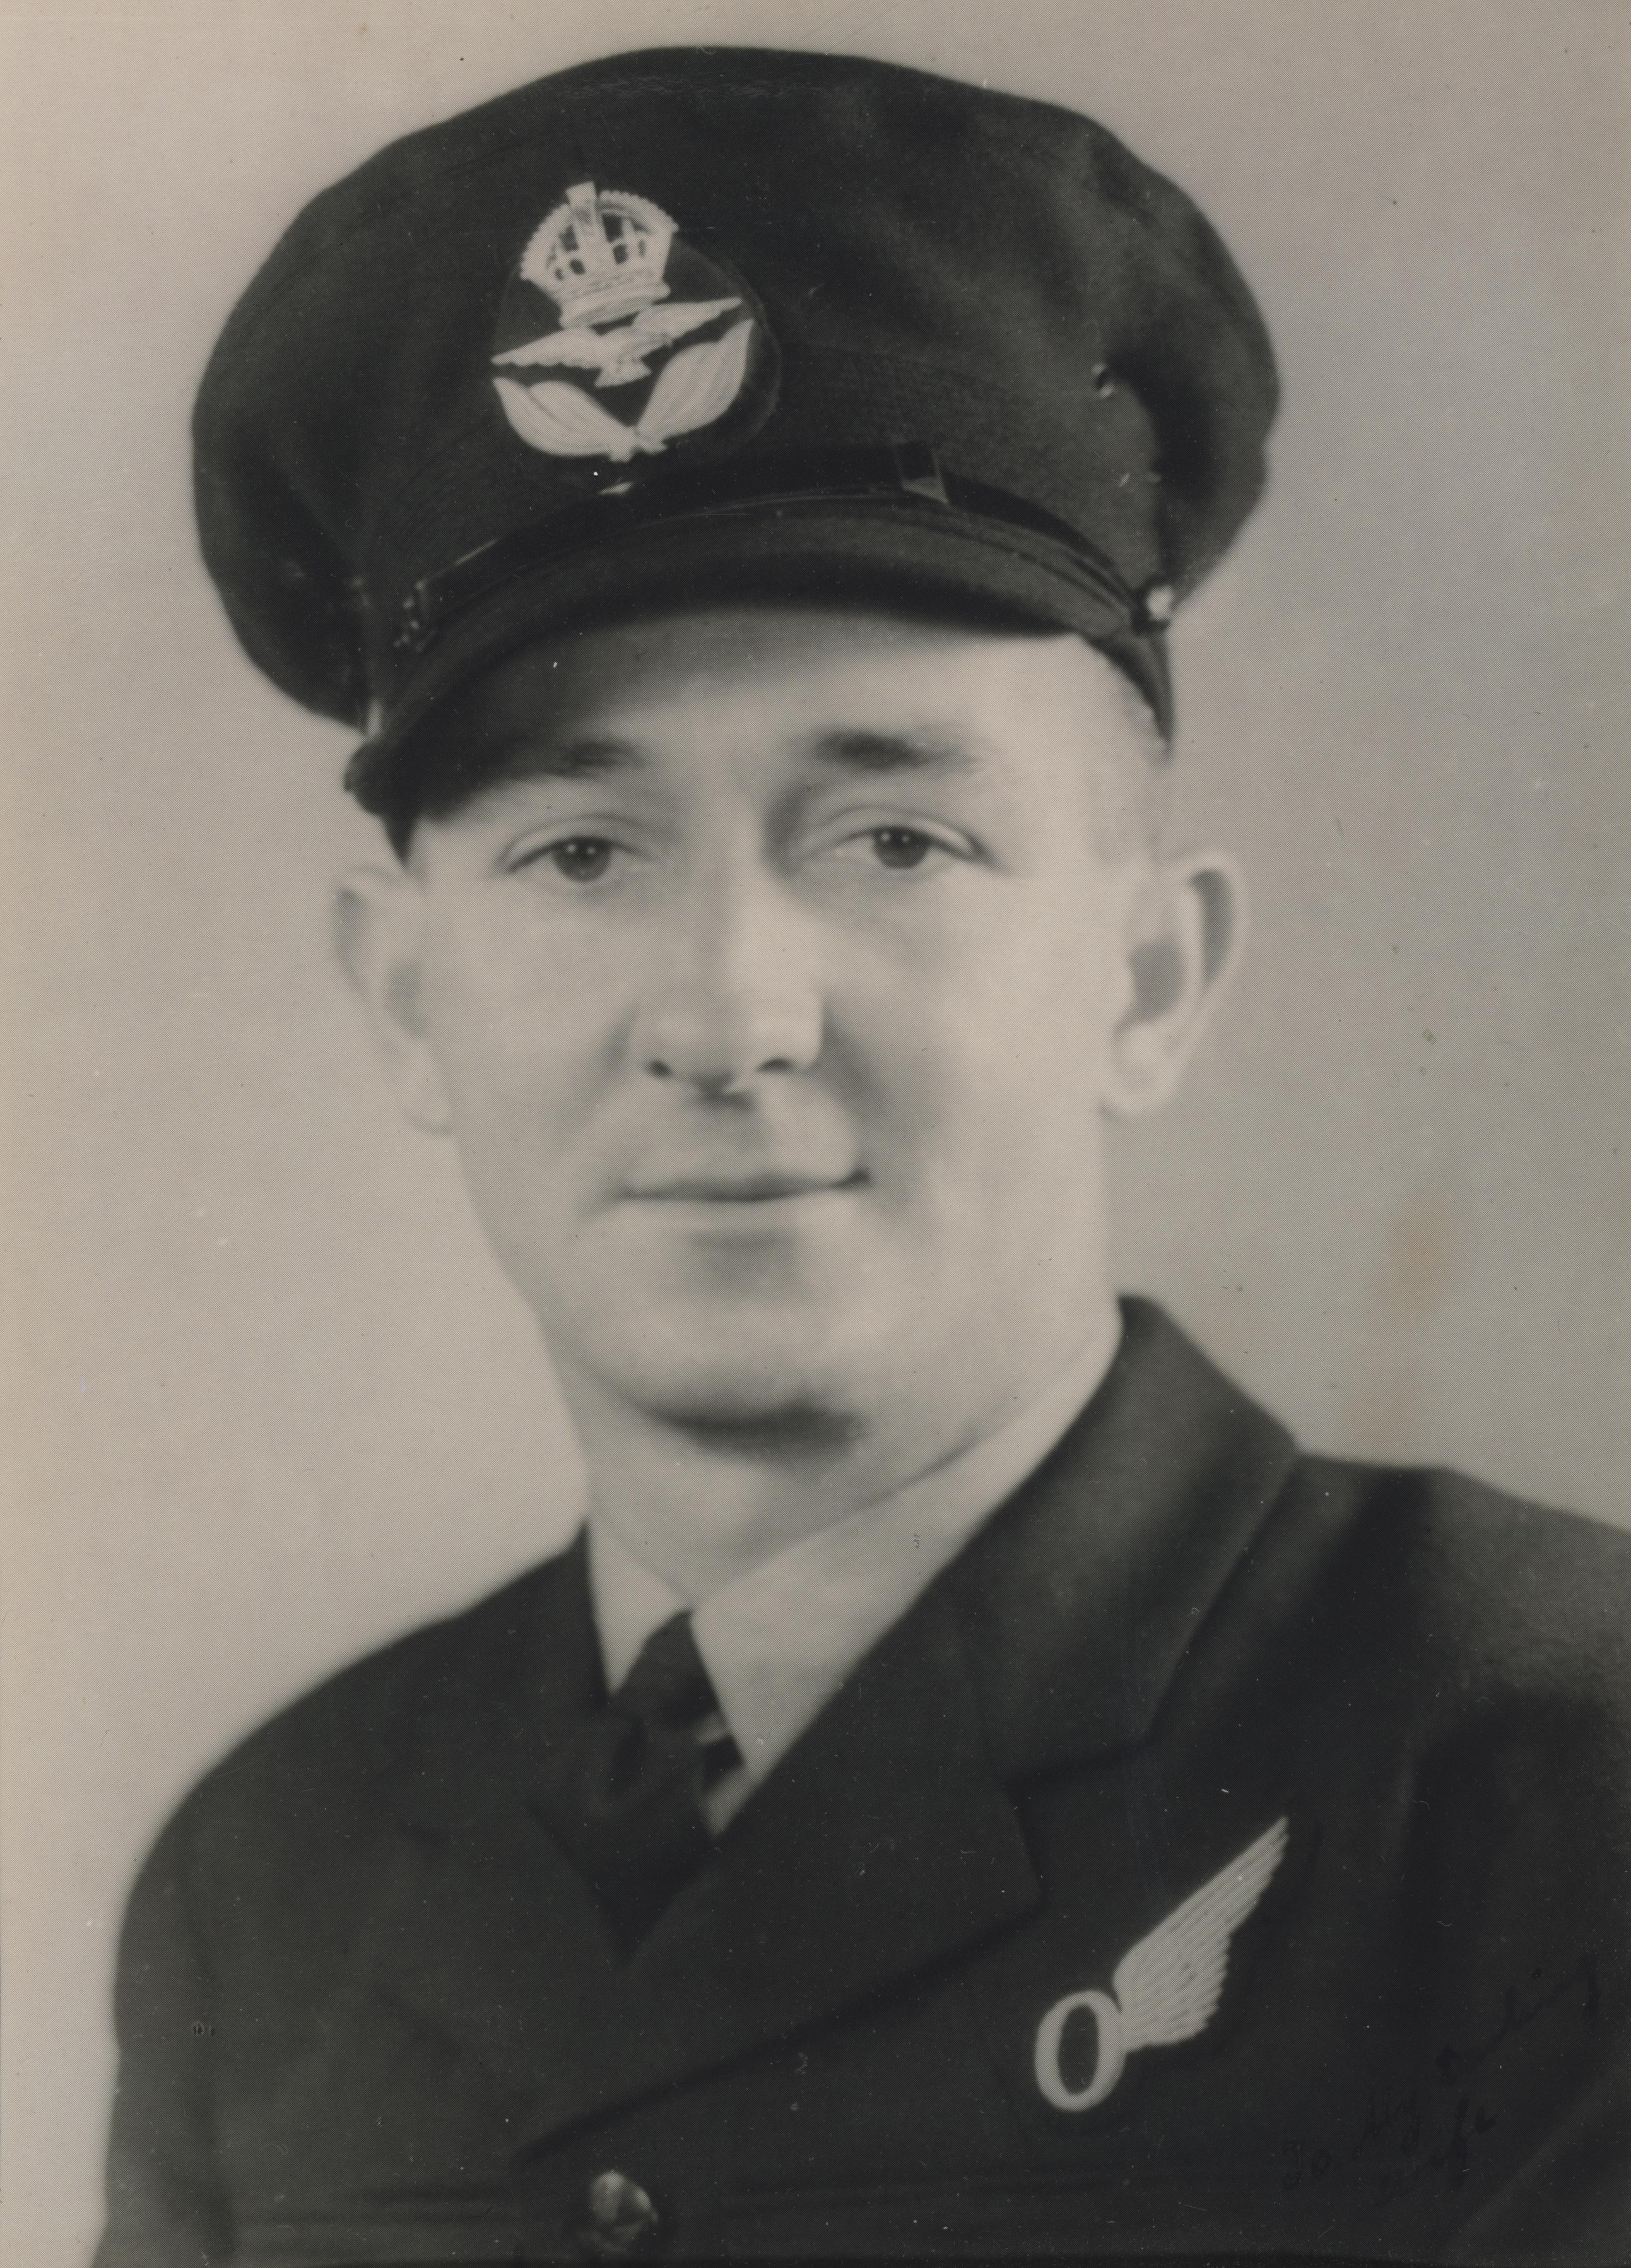 A photograph of F/L Venning. He was in No 7 Squadron, the first RAAF unit to drop surrender leaflets.